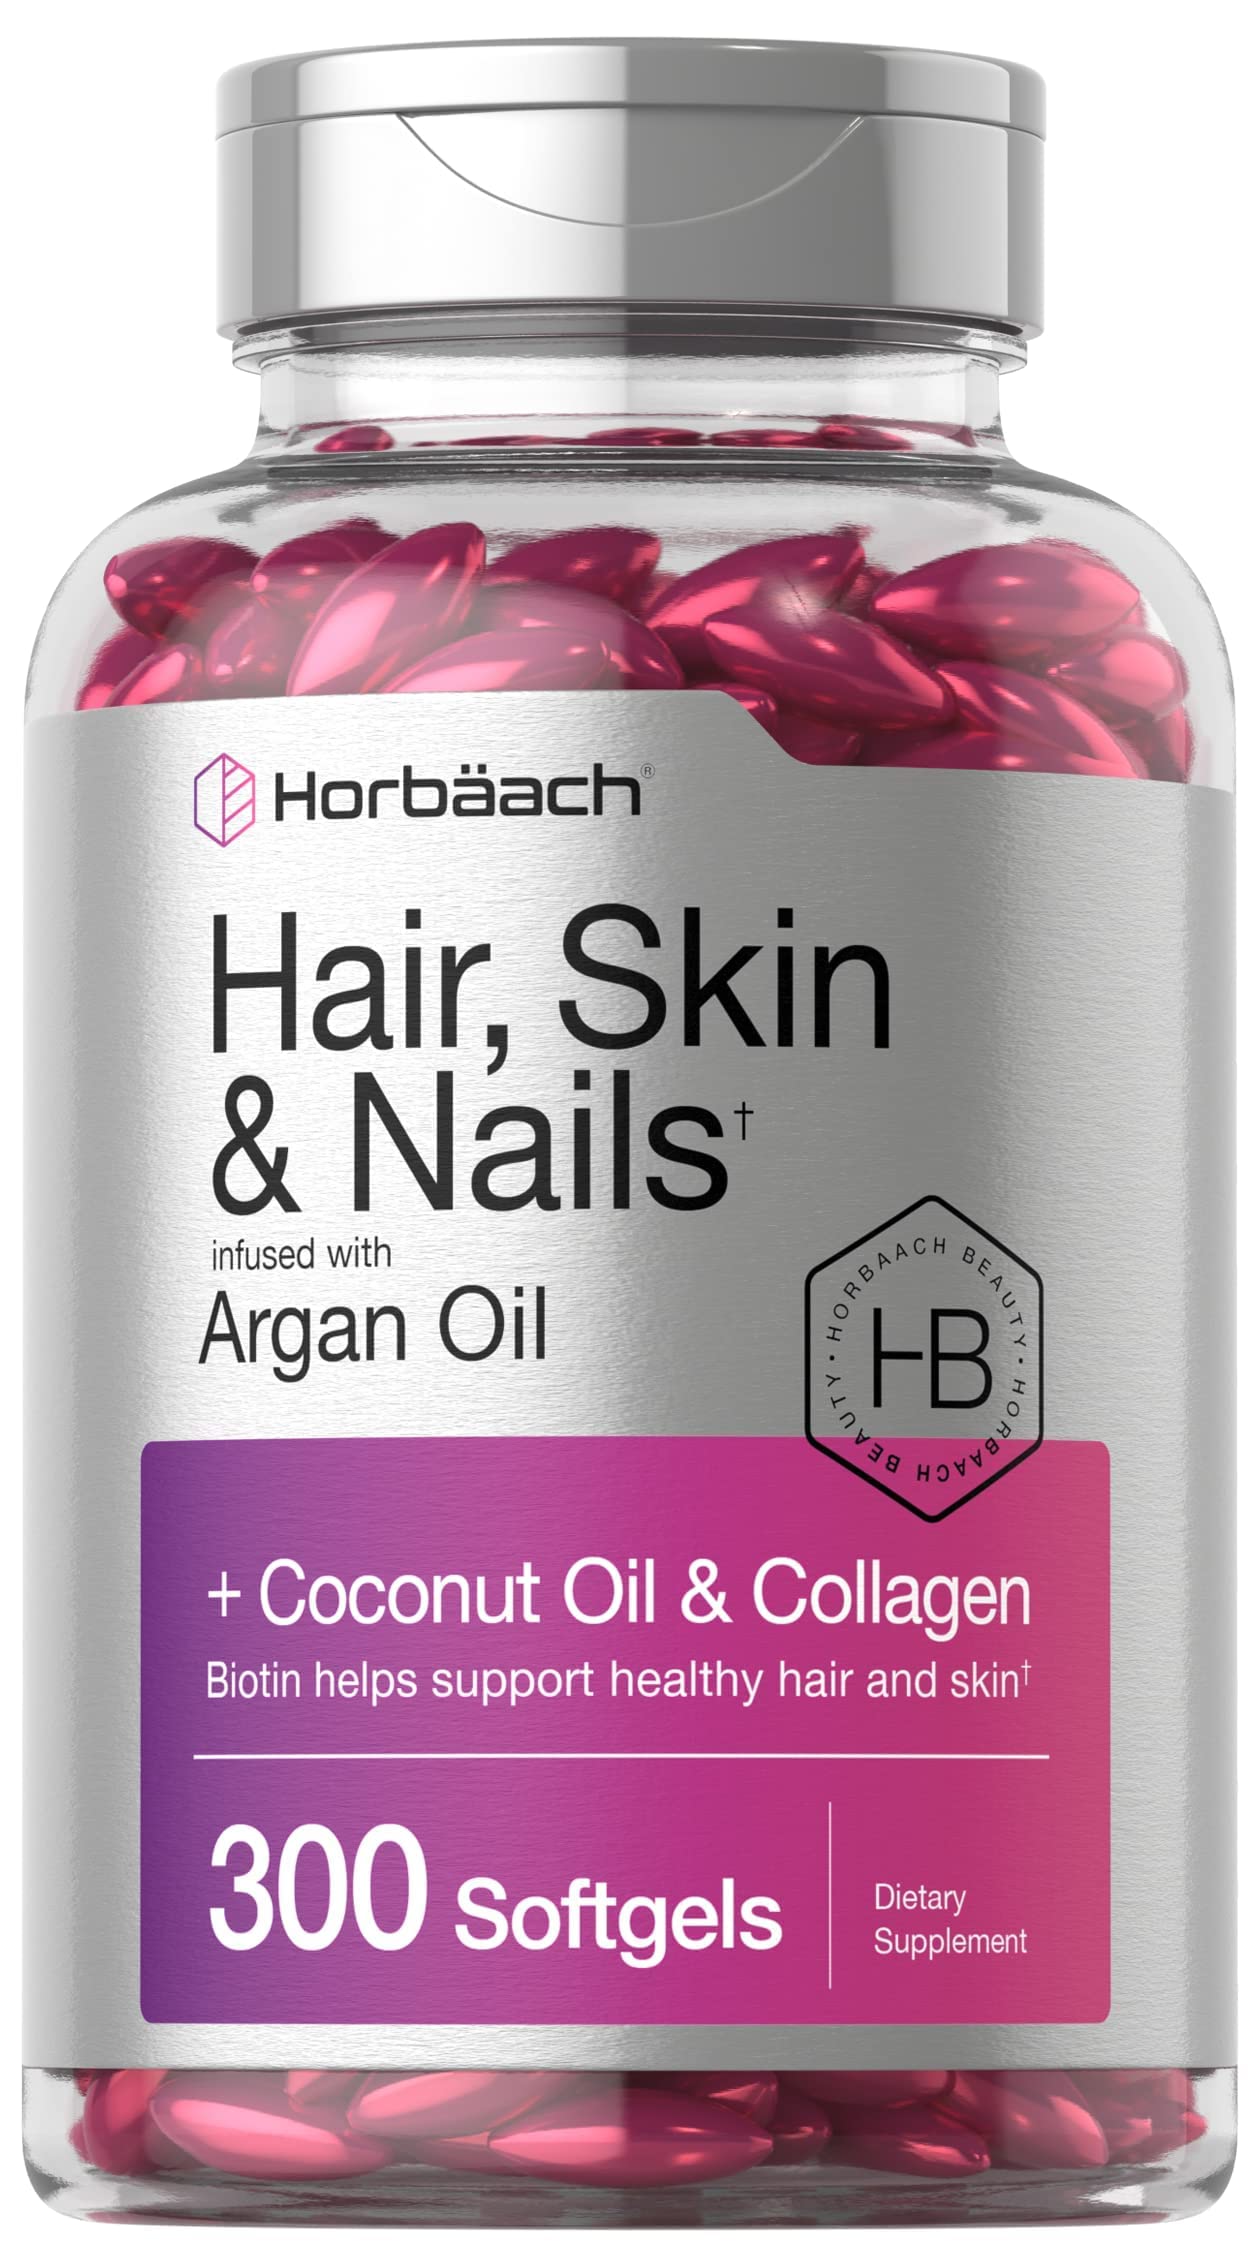 Mua Hair Skin and Nails Vitamins | 300 Softgels | with Biotin and Collagen  | Infused with Argan Oil and Coconut Oil | Non-GMO, Gluten Free Supplement  | by Horbaach trên Amazon Mỹ chính hãng 2023 | Fado